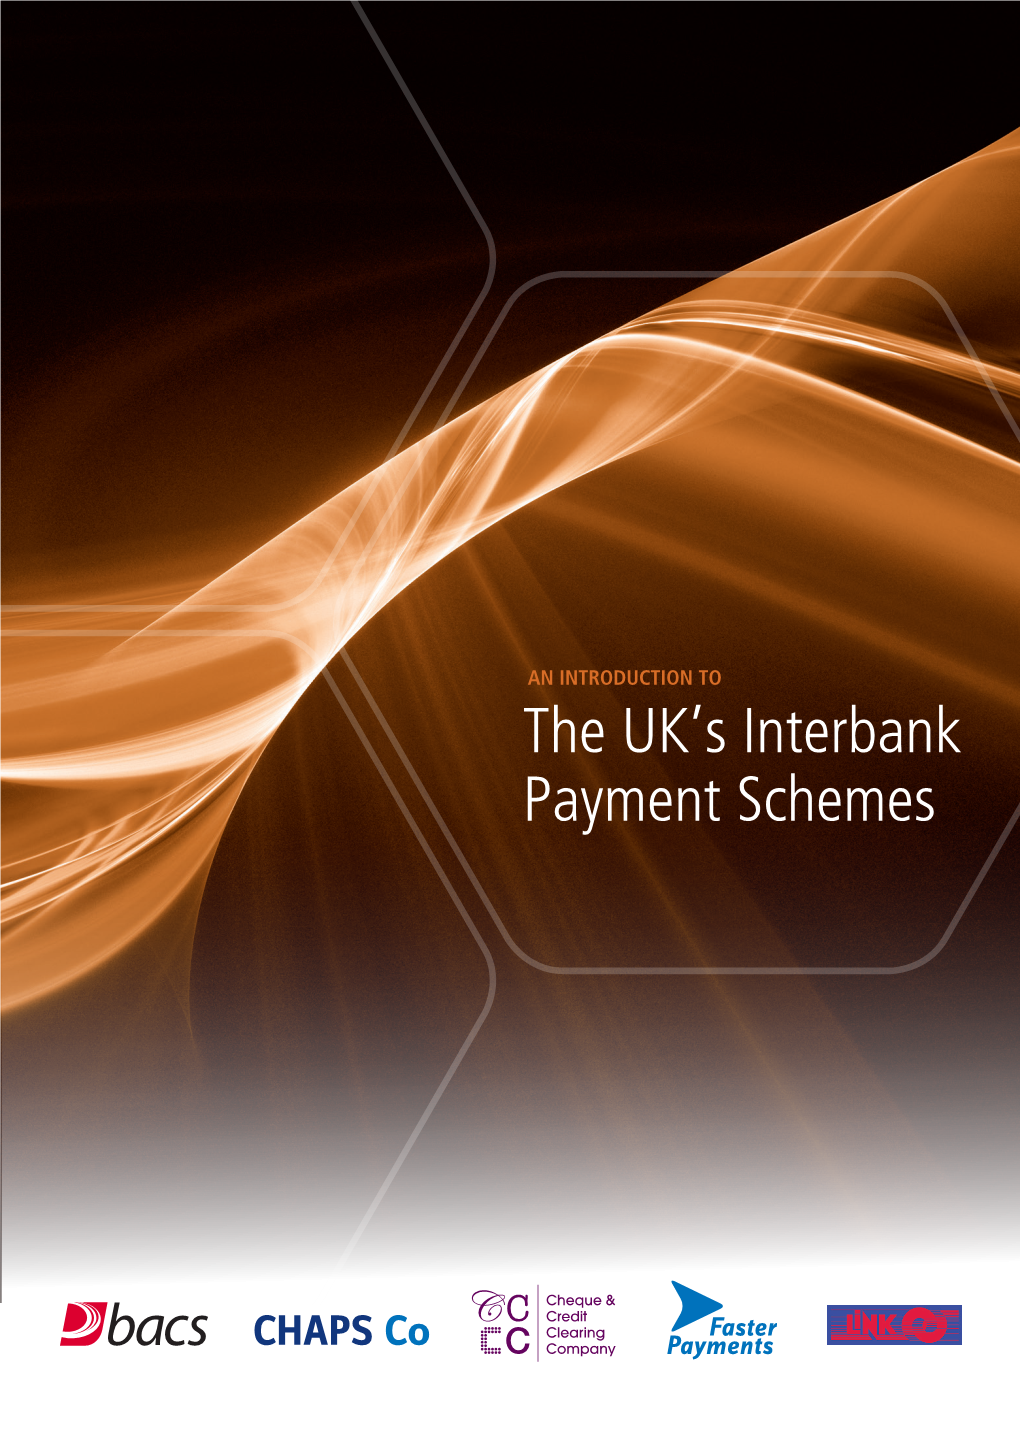 The UK's Interbank Payment Schemes